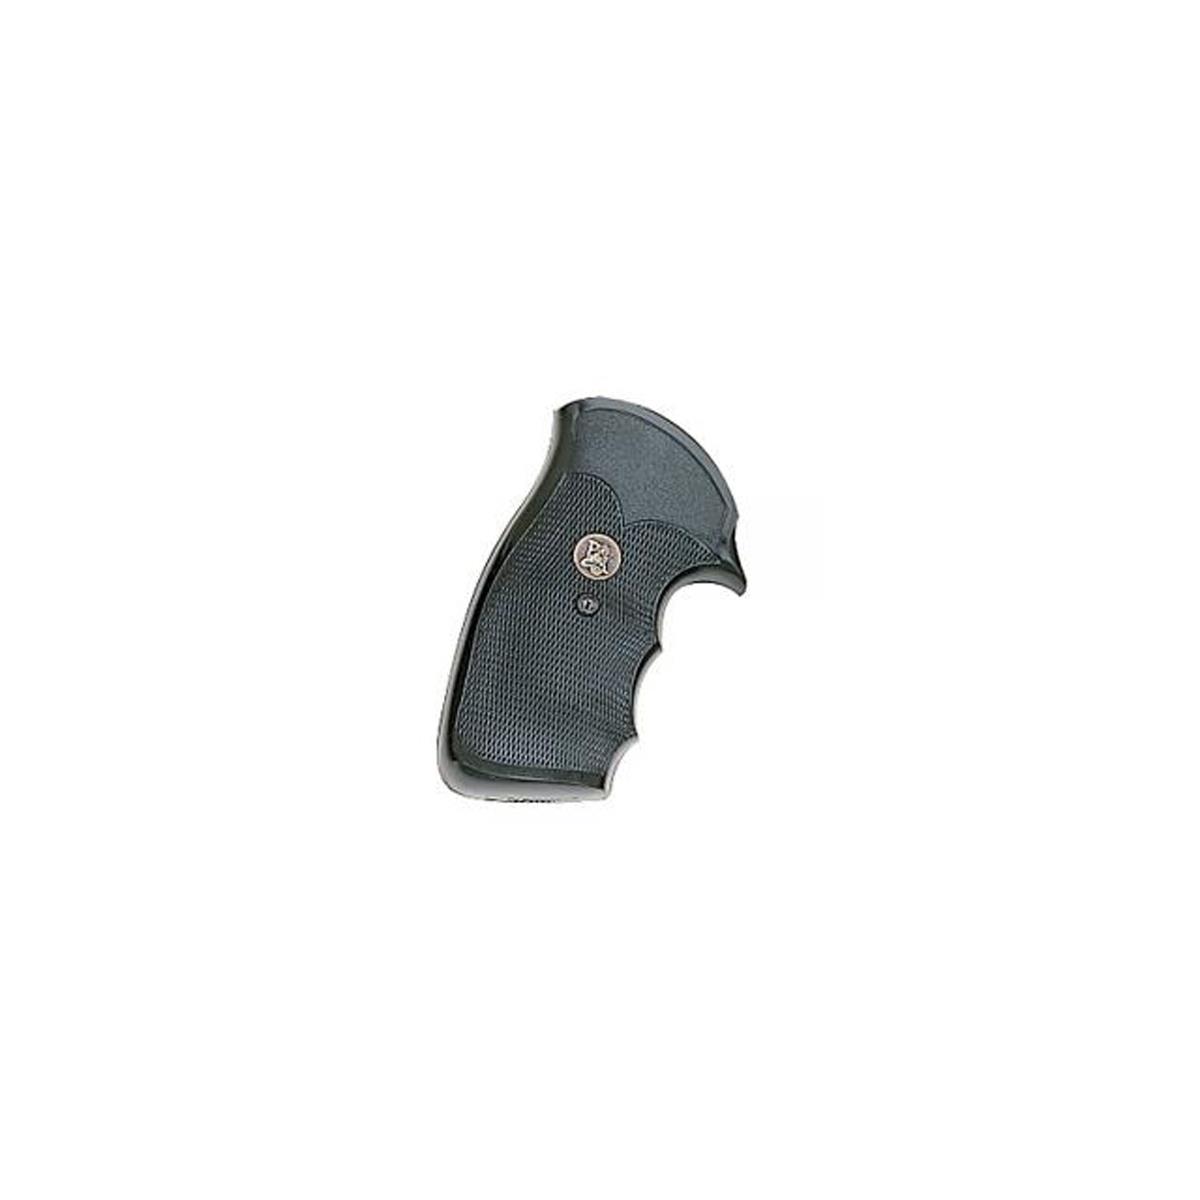 Image of Lyman Pachmayr Gripper Replacement Grip for Charter Arms Revolvers